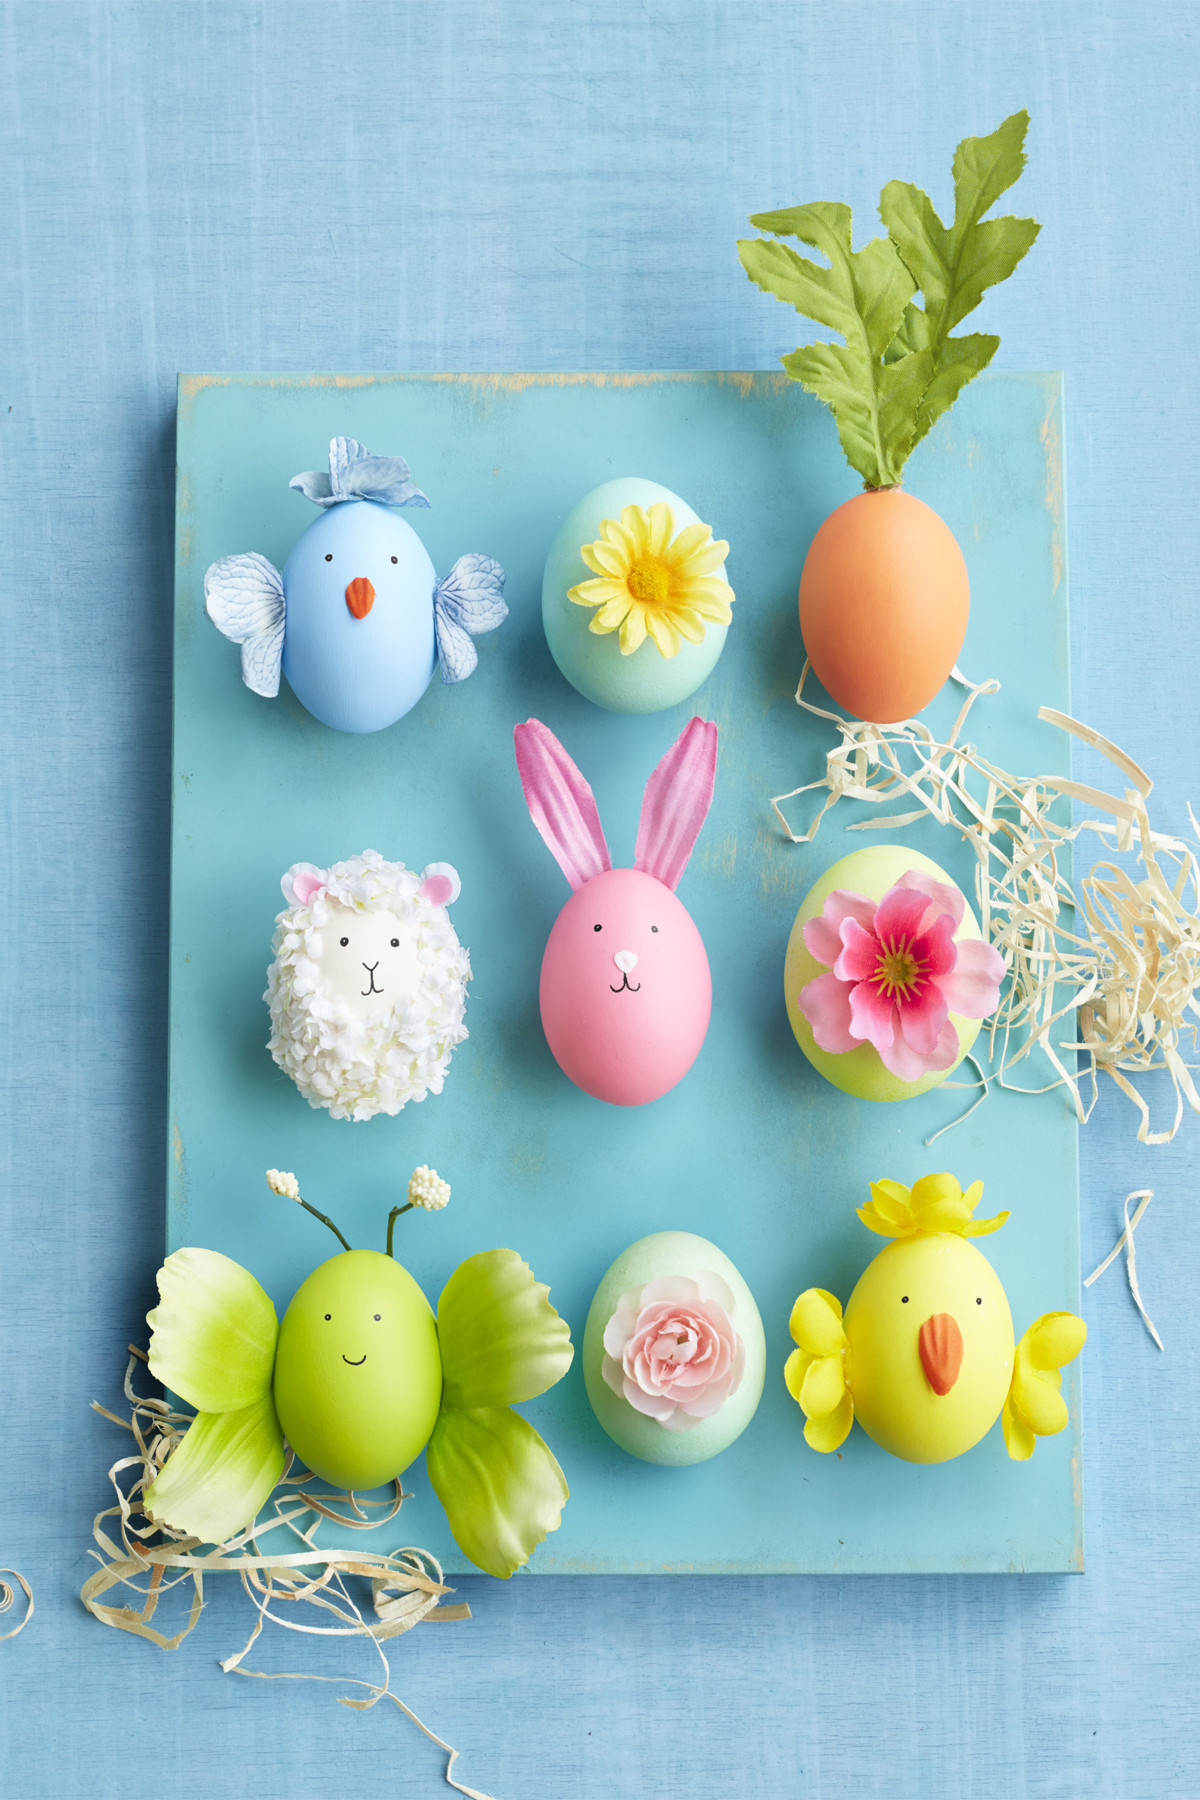 Easter Egg Decoration Ideas
 42 Cool Easter Egg Decorating Ideas Creative Designs for